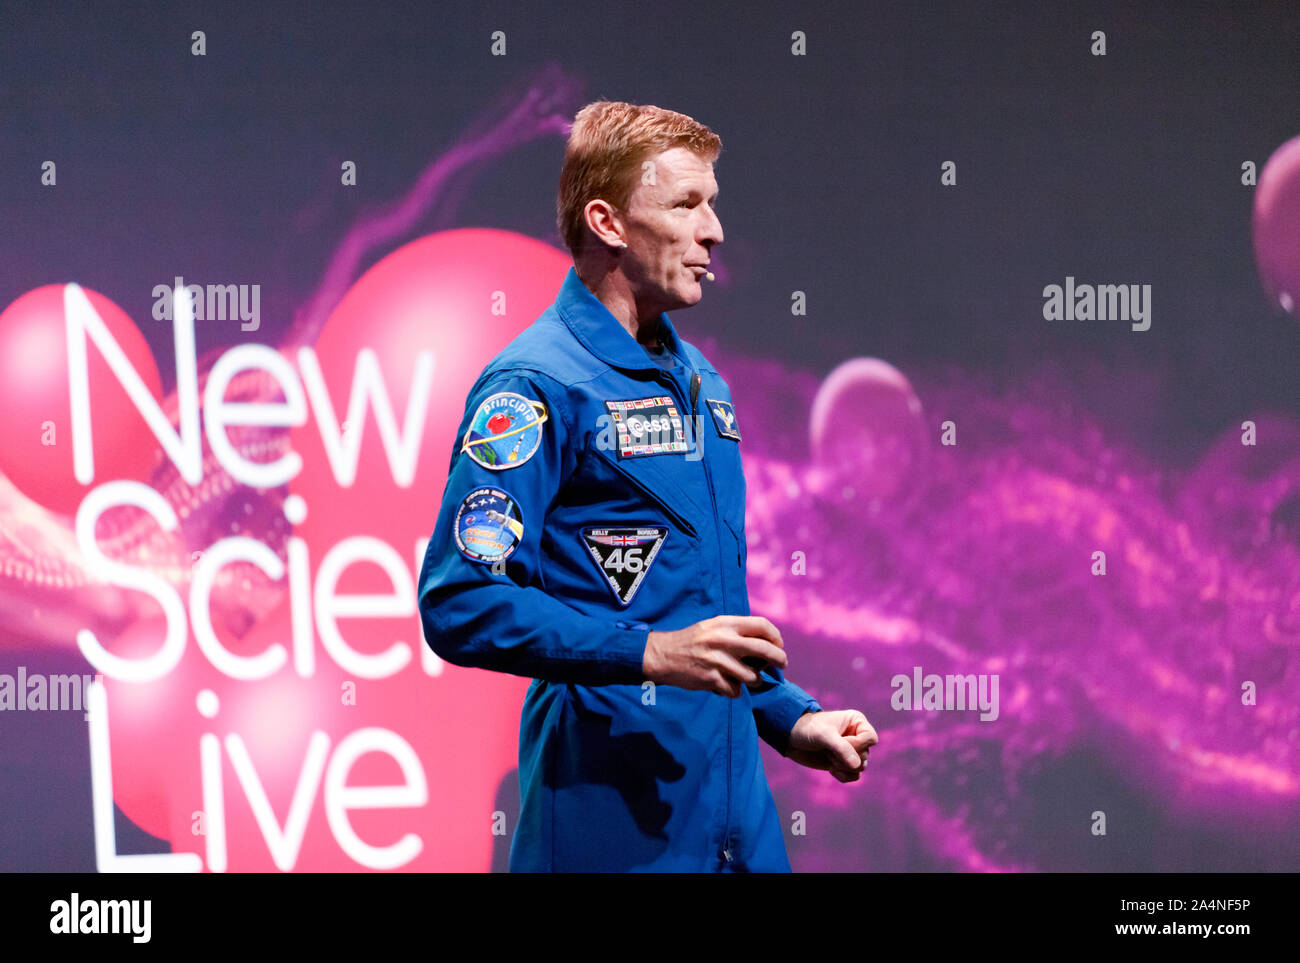 Astronaut, Tim Peake giving a talk 'Return to the Moon', describing the motivation and challenges of visiting our neighbour in space, on the main stage at New Scientist Live 2019 Stock Photo